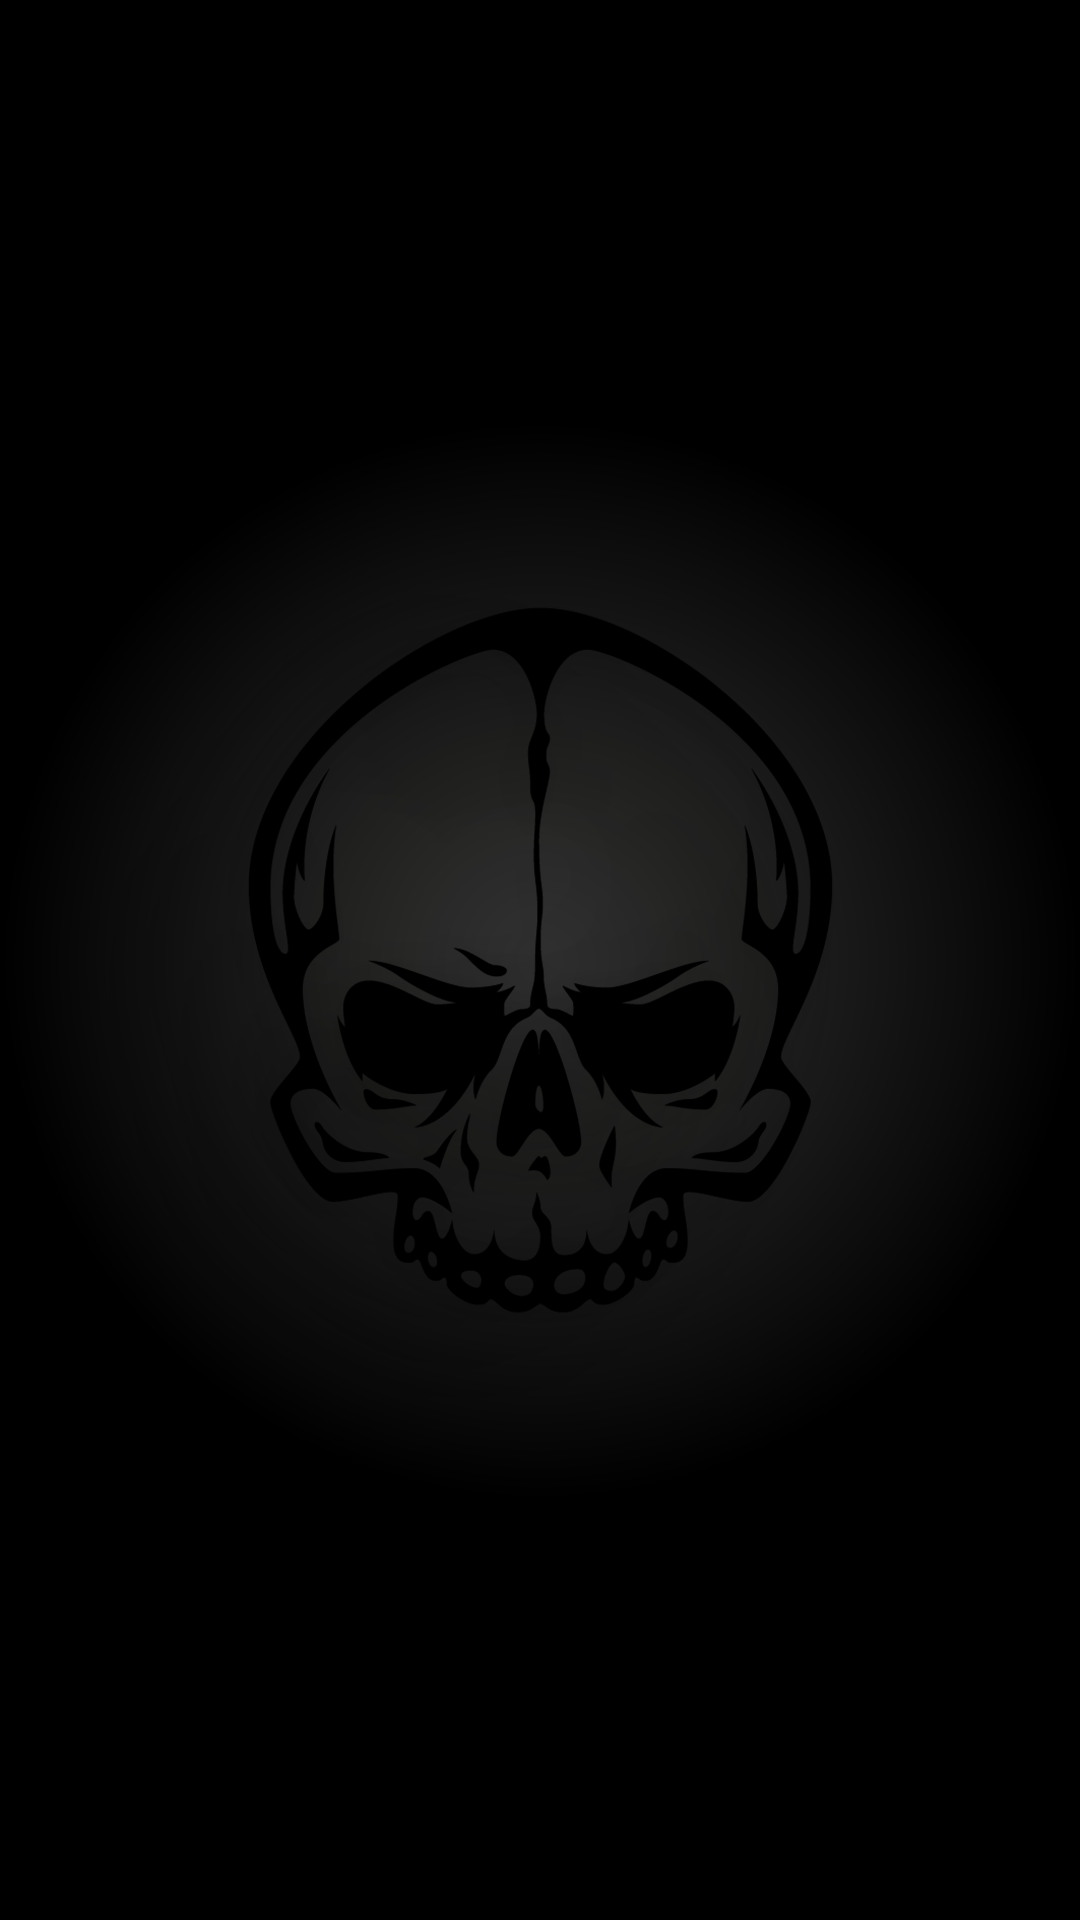 Hd Skull Wallpaper For Android posted .cutewallpaper.org